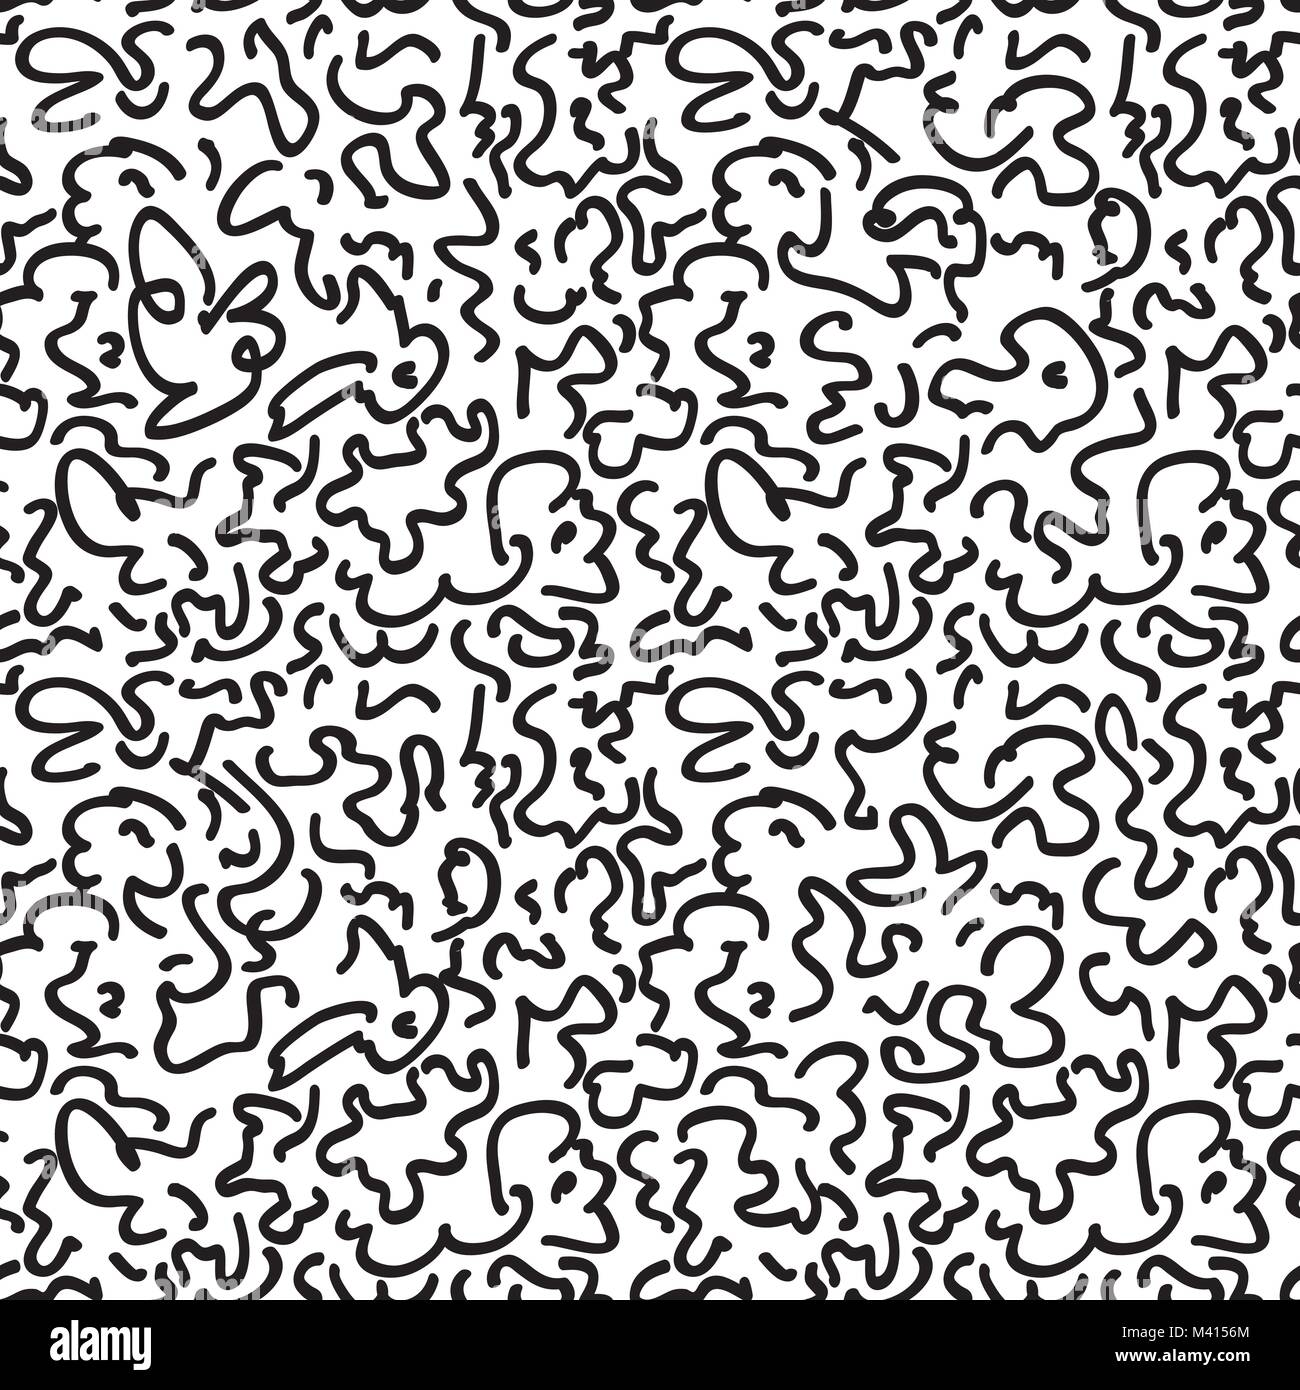 Abstract scribble line seamless pattern. Swirled curve doodle line tile background Stock Vector